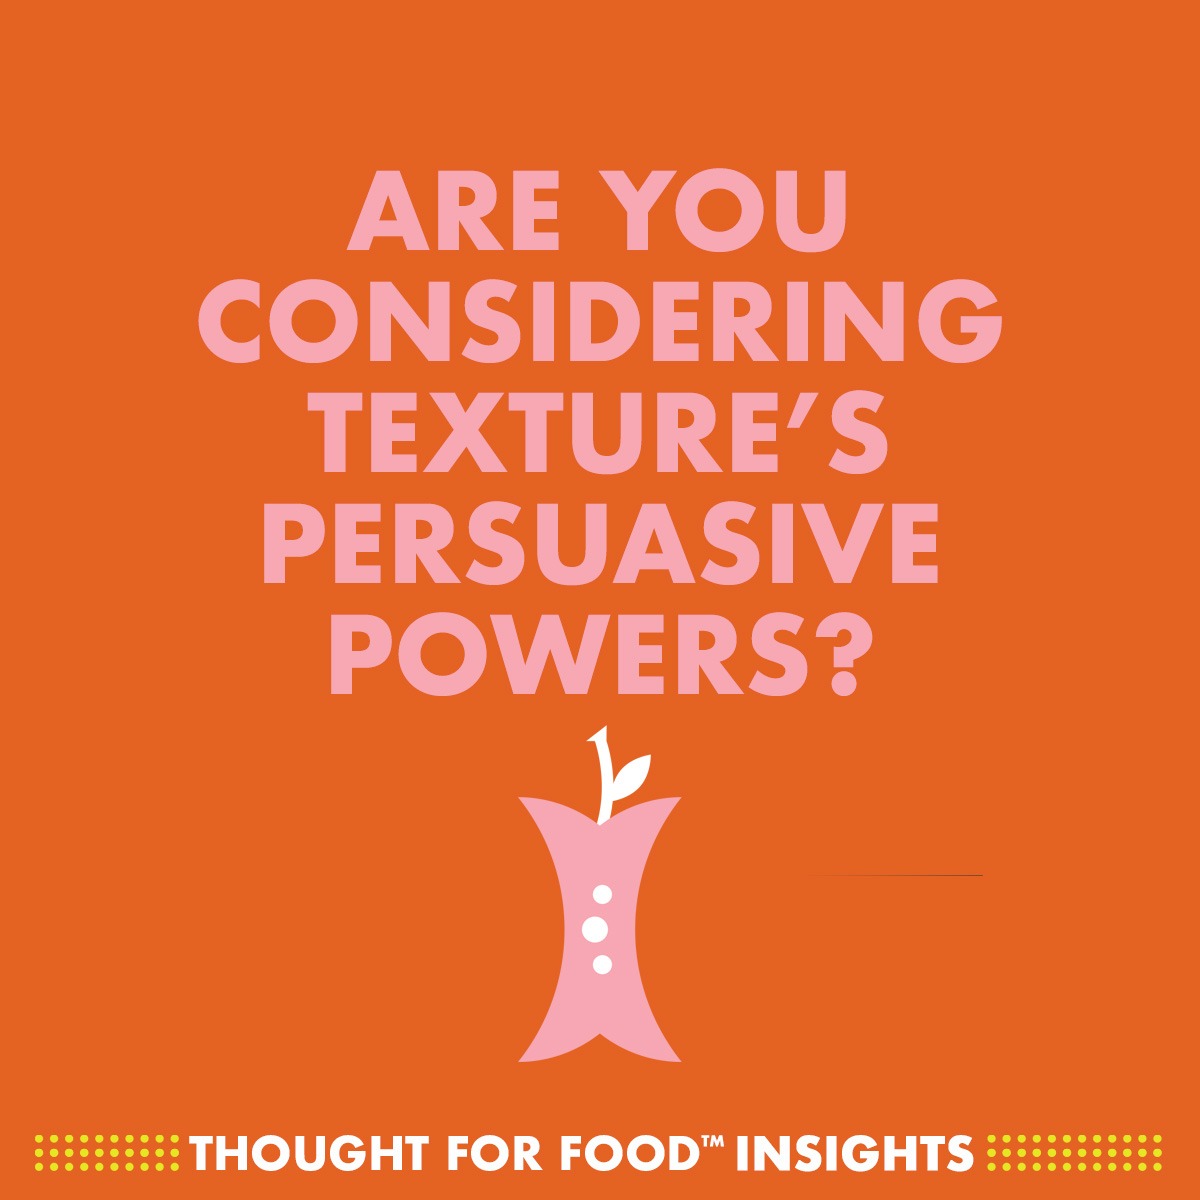 Are you considering texture's persuasive powers?